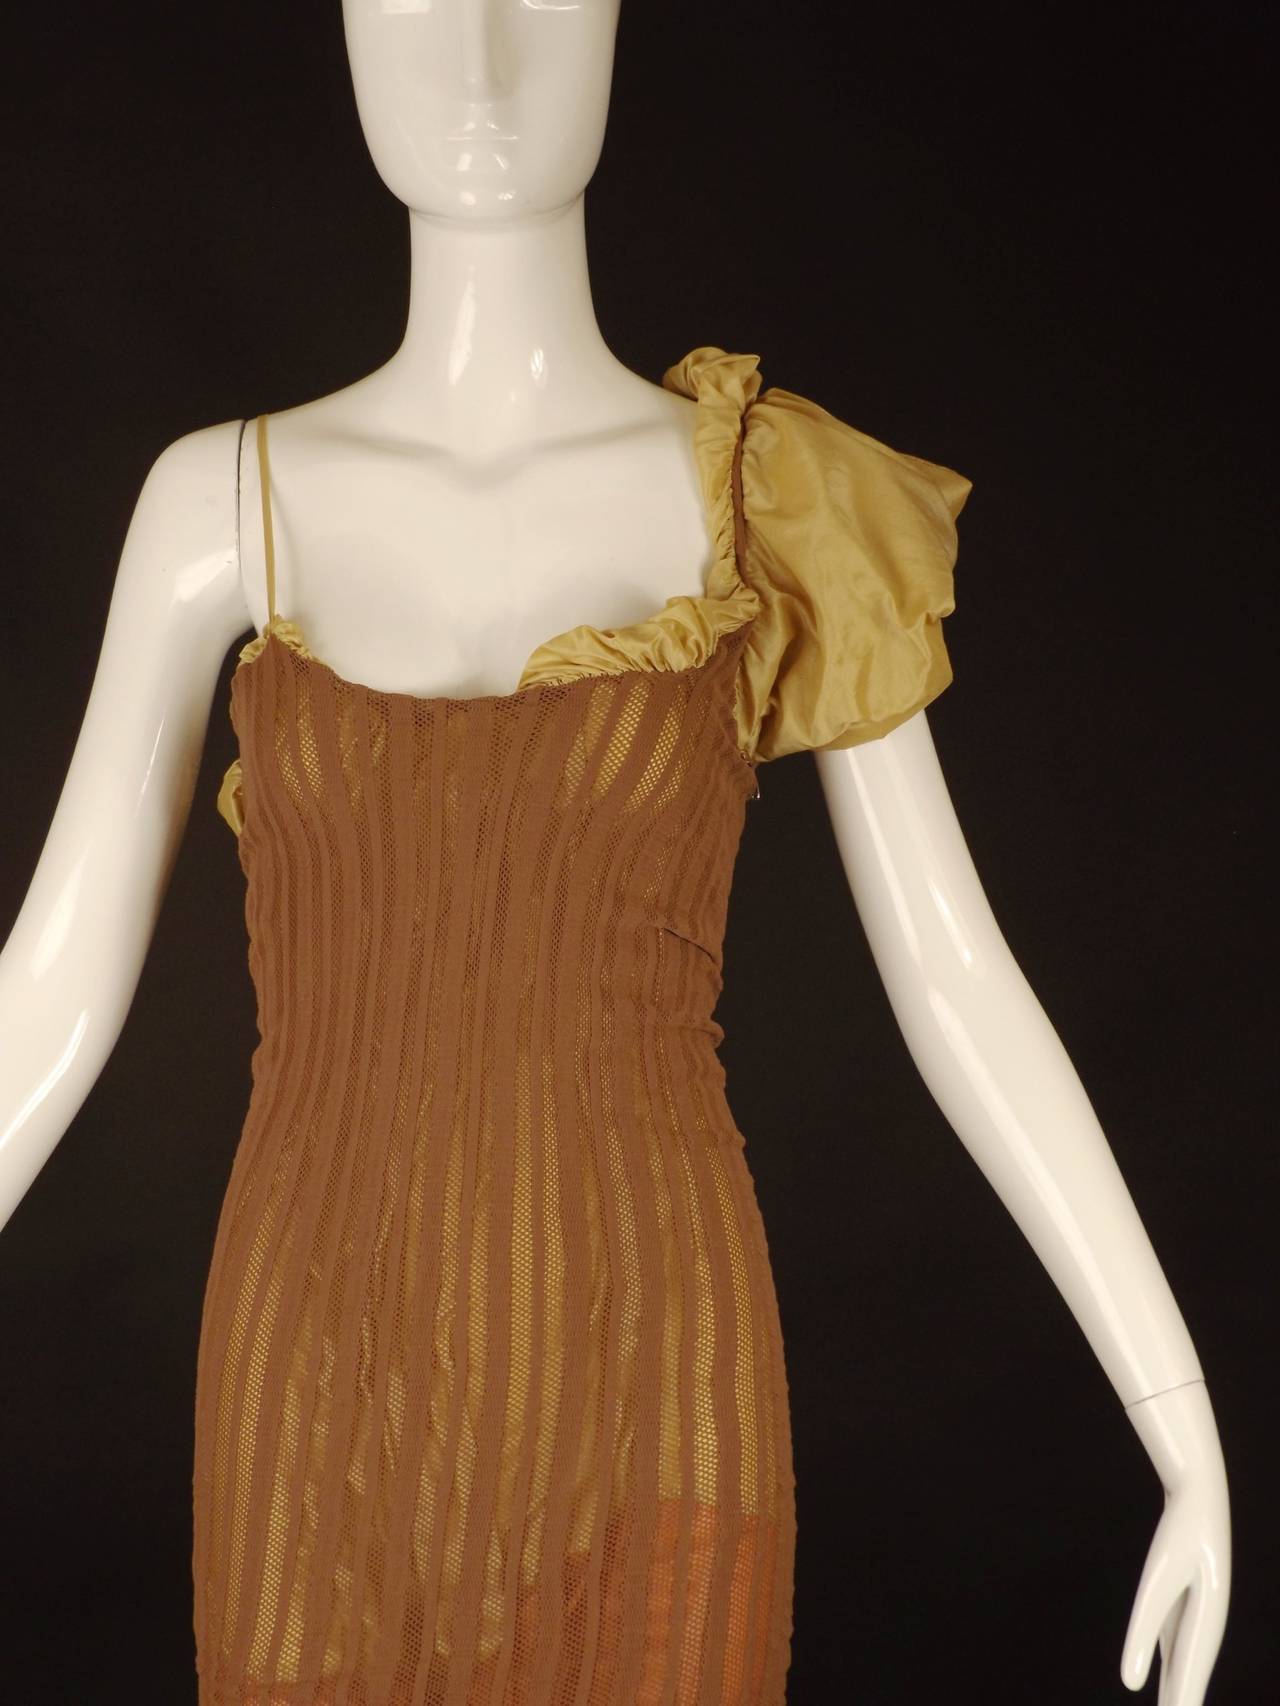 Spring, 2001 Jean Paul Gaultier runway dress in a parachute silk with a cocoa brown ribbed and clocked knit tube tee. The silk is color blocked in a golden yellow, melon and a cool shade of green. The tee is very stretchy and the silk so very